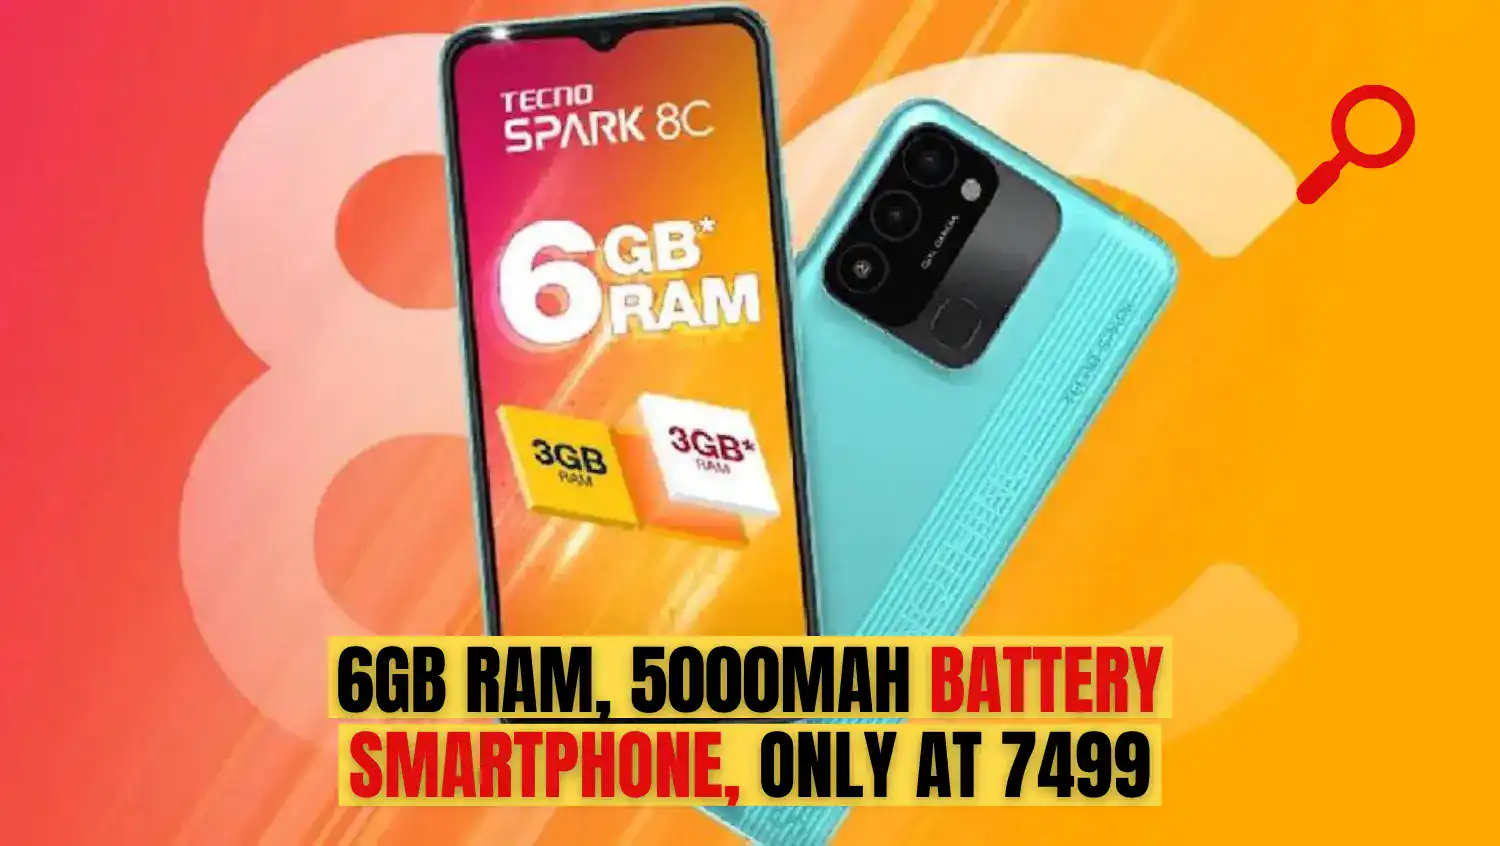 Tecno Spark 8C: 6GB RAM, 5000mAh battery Smartphone, only at 7499